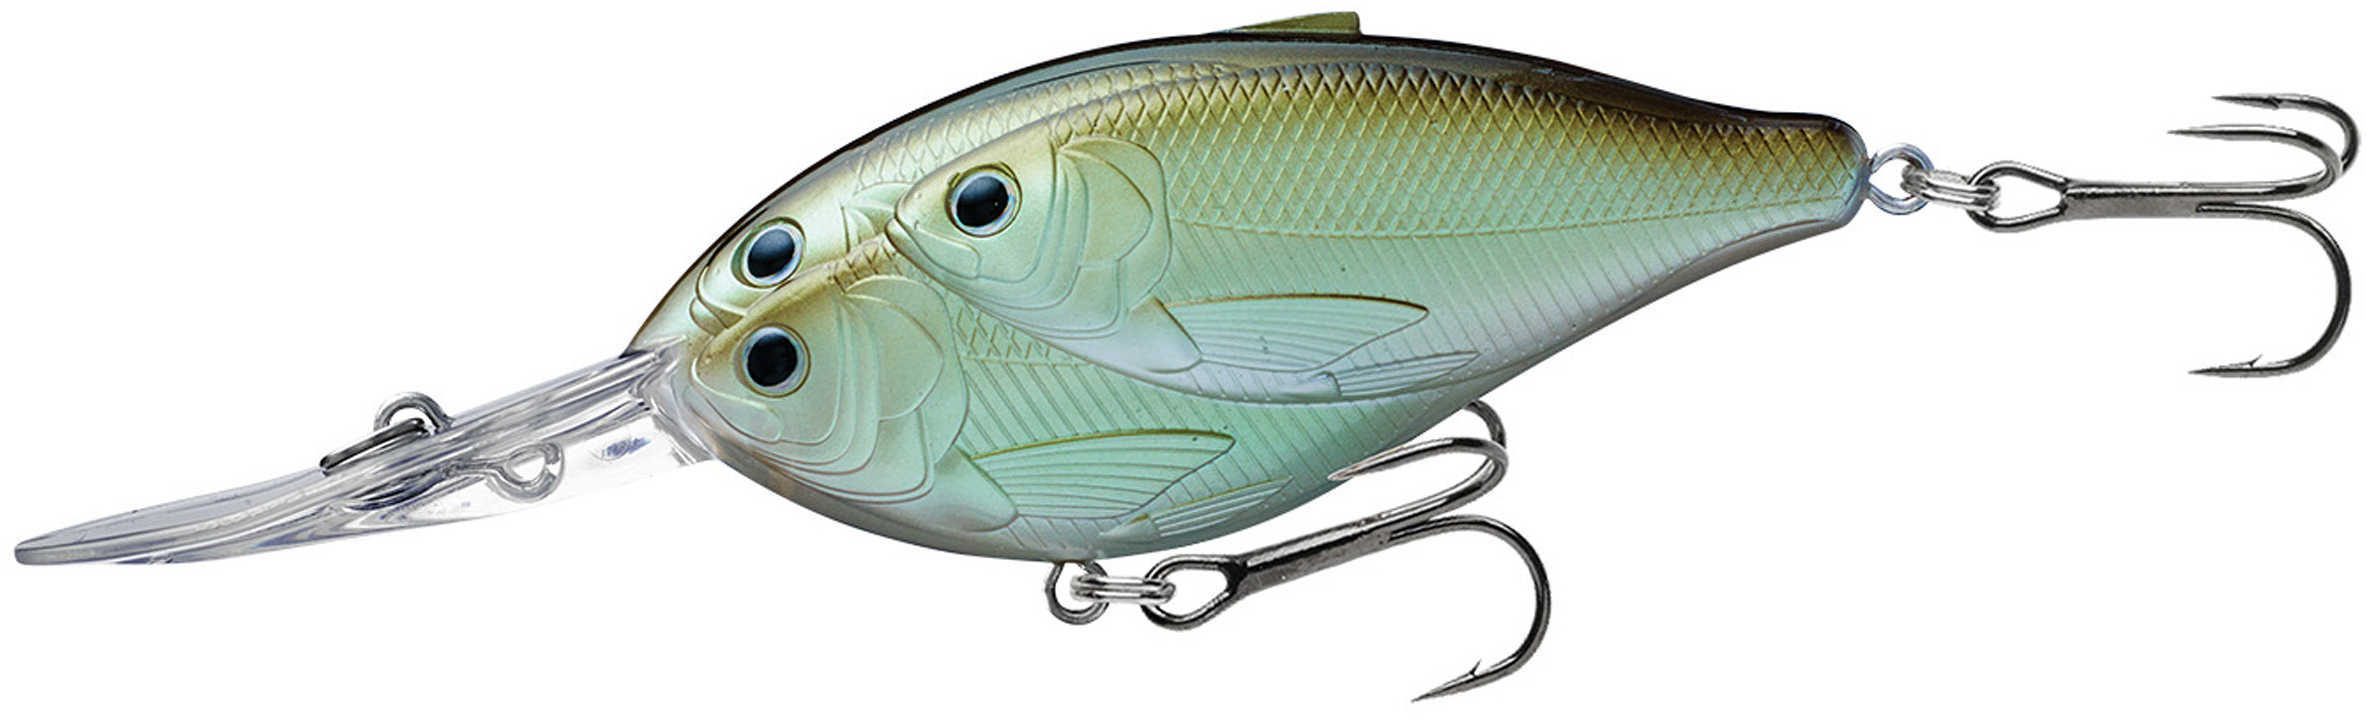 LIVETARGET Lures / Koppers Fishing and Tackle Corp Threadfin Shad Crankbait 3" Number 2 Hook Size 16 Depth Green/Ghost